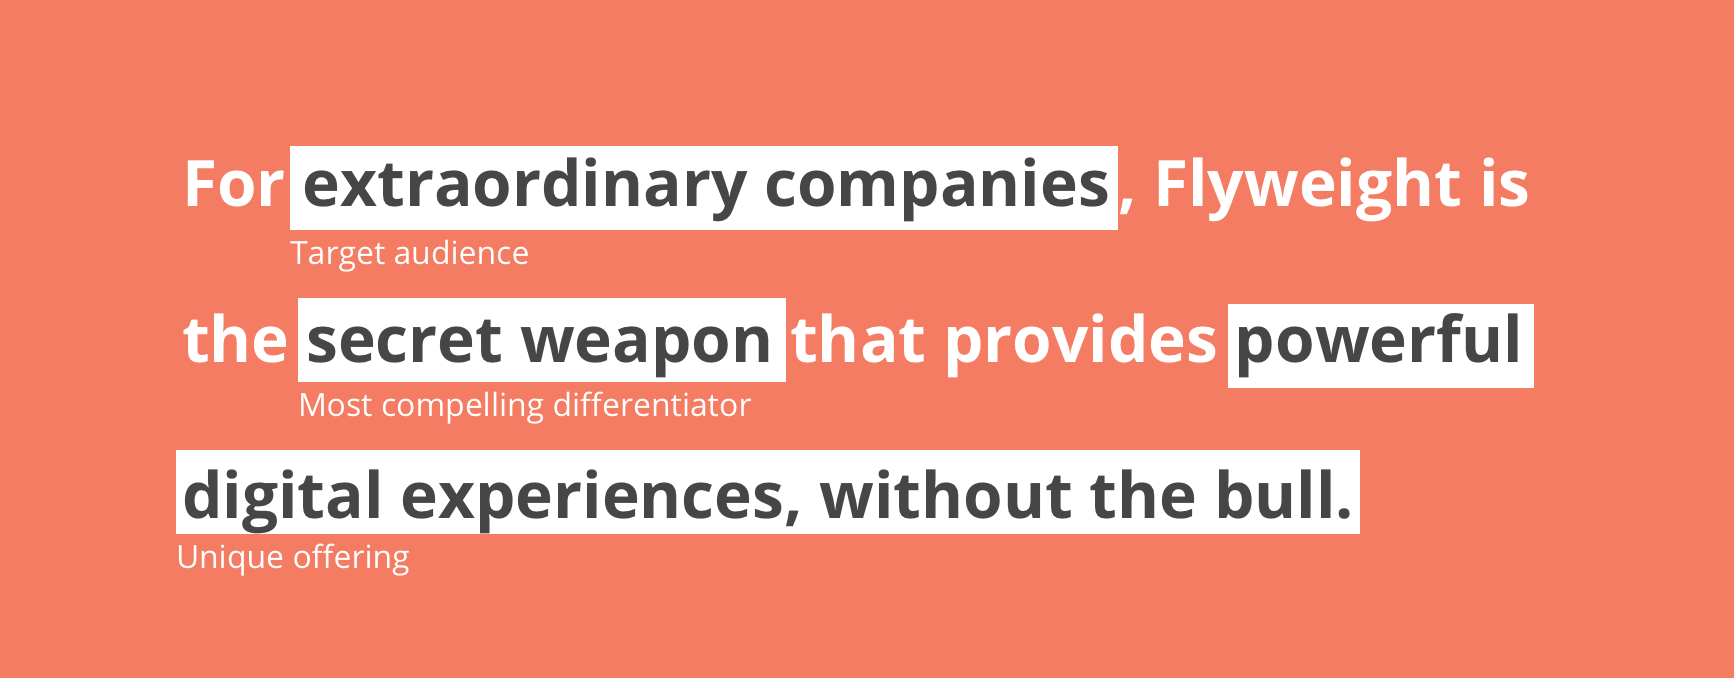 For extraordinary companies, Flyweight is the secret weapon that provides powerful digital experiences, without the bull.